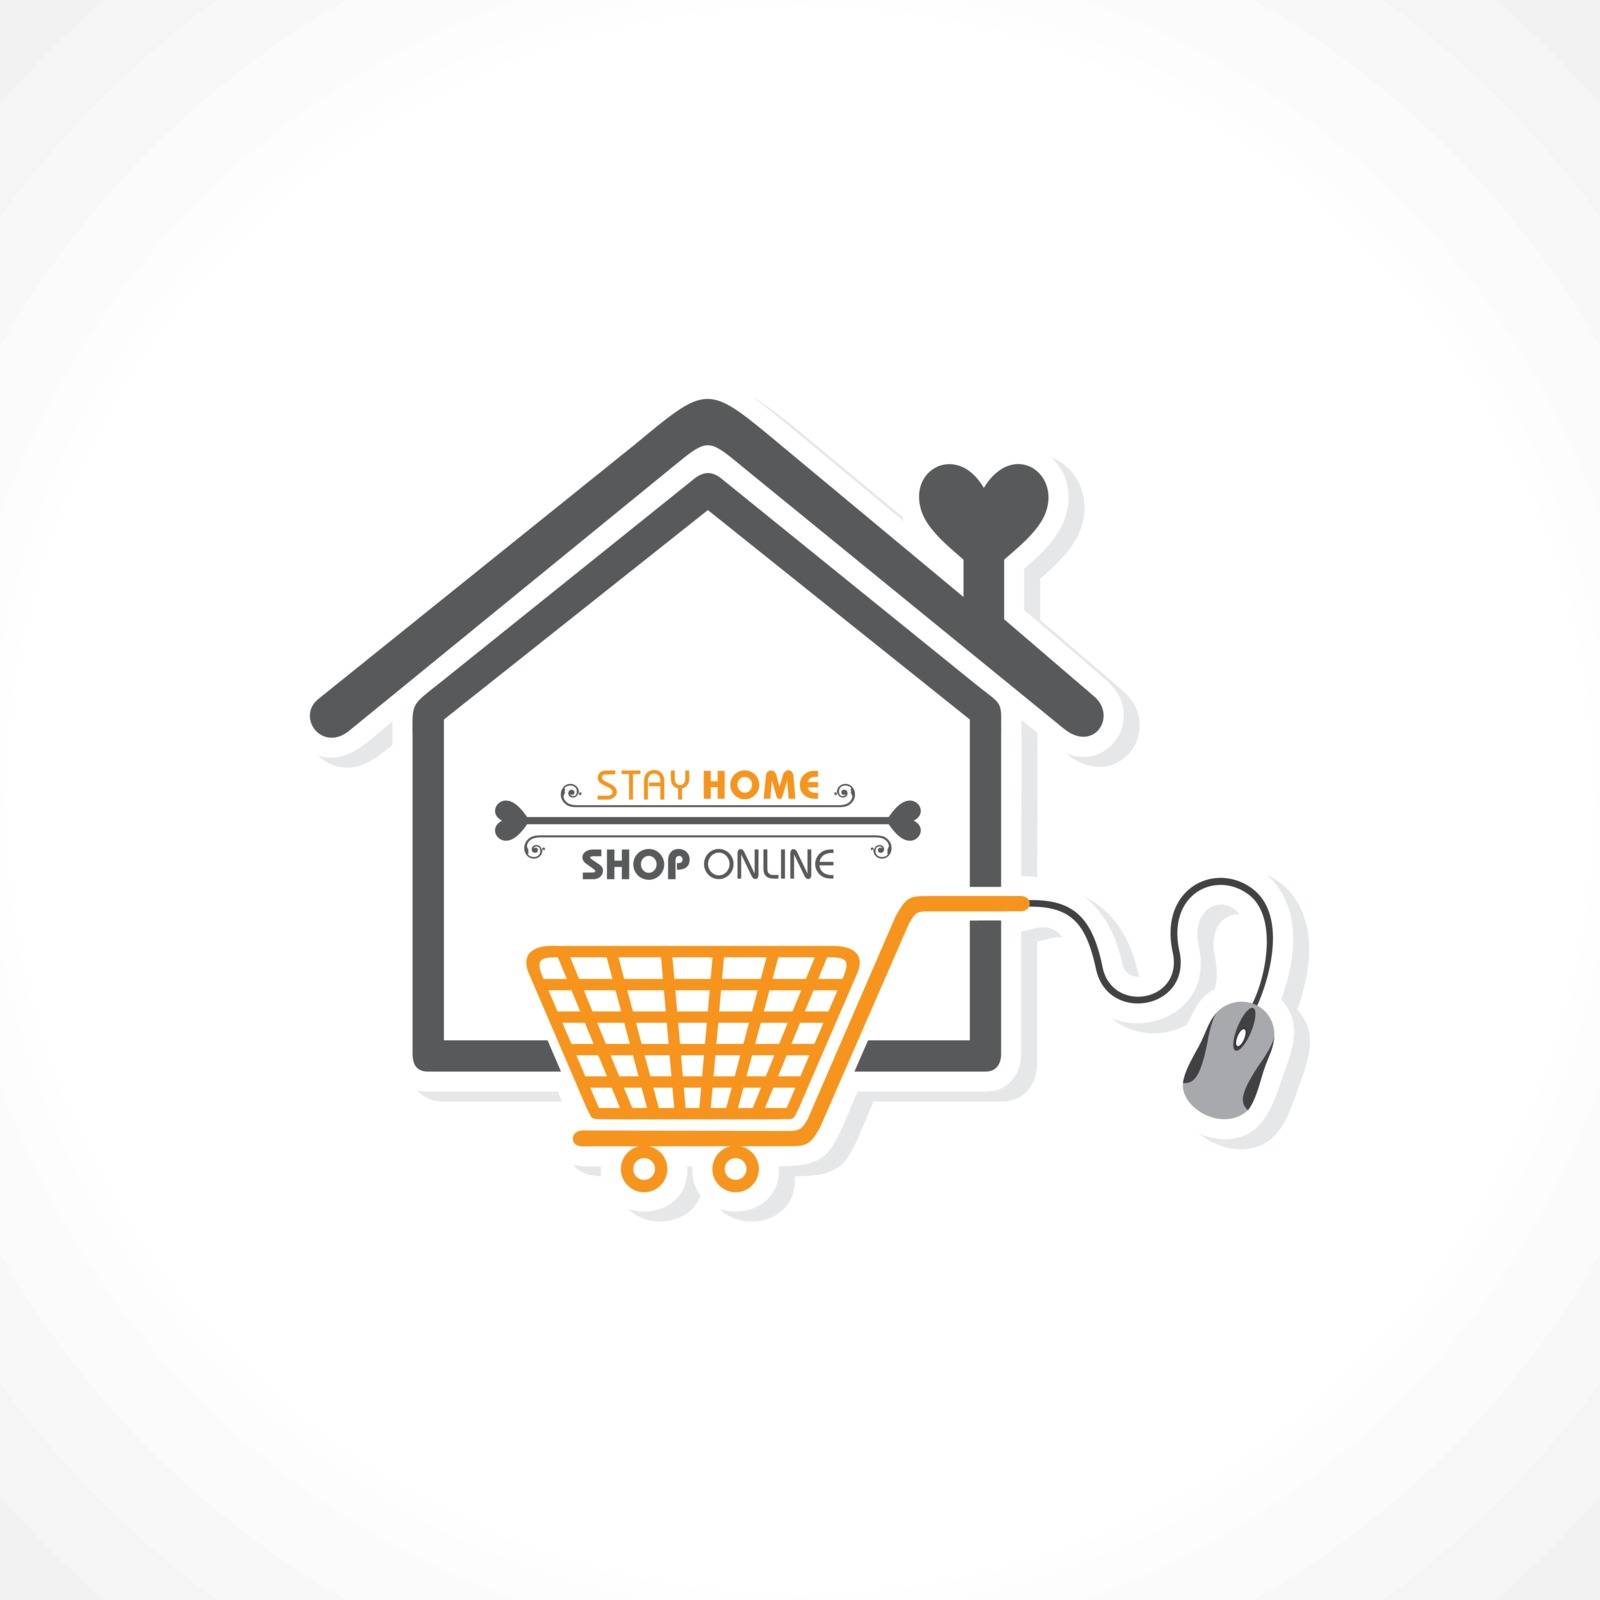 Illustration for Stay Home, Stay Safe and Online shopping with free and express delivery Concept by graphicsdunia4you